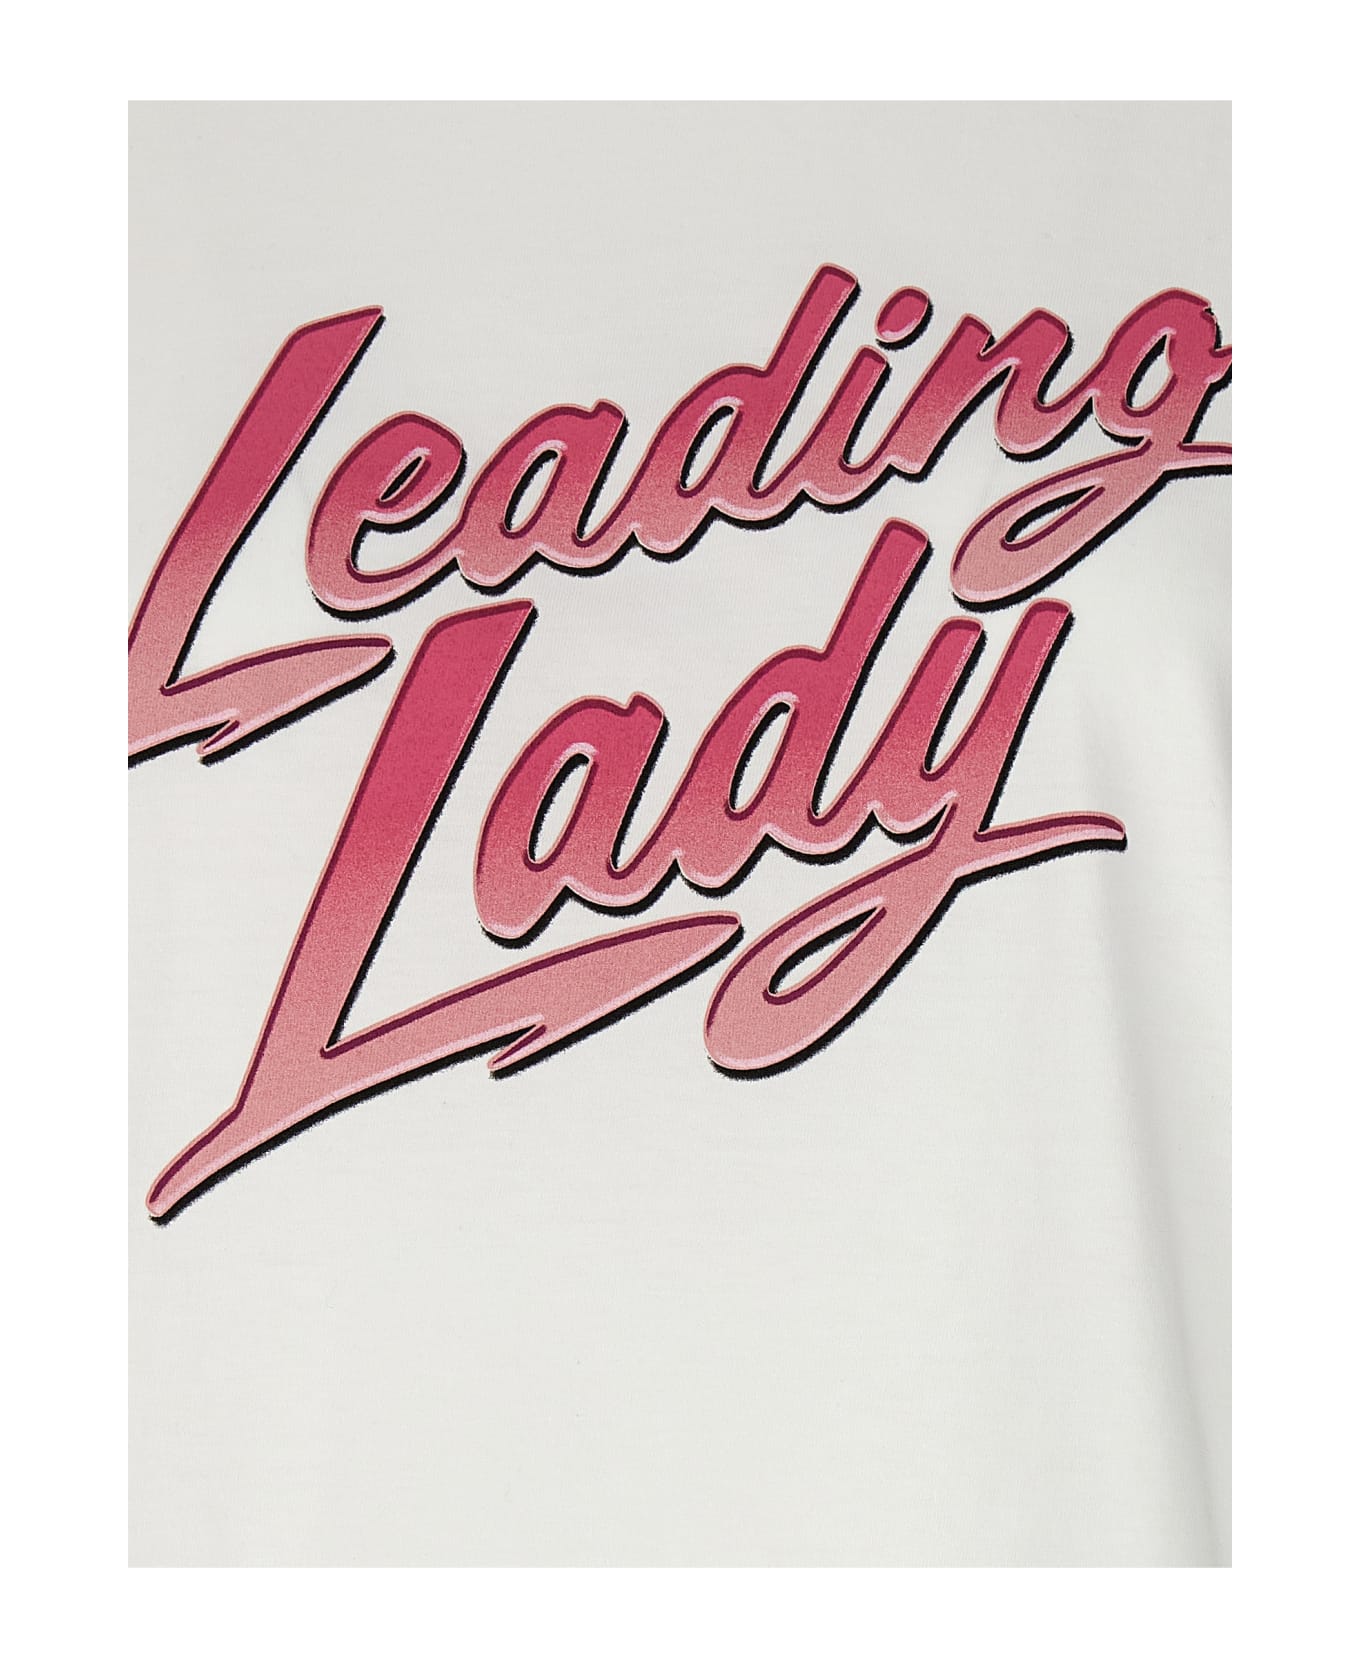 Dsquared2 Leading Lady T-shirt - White Tシャツ